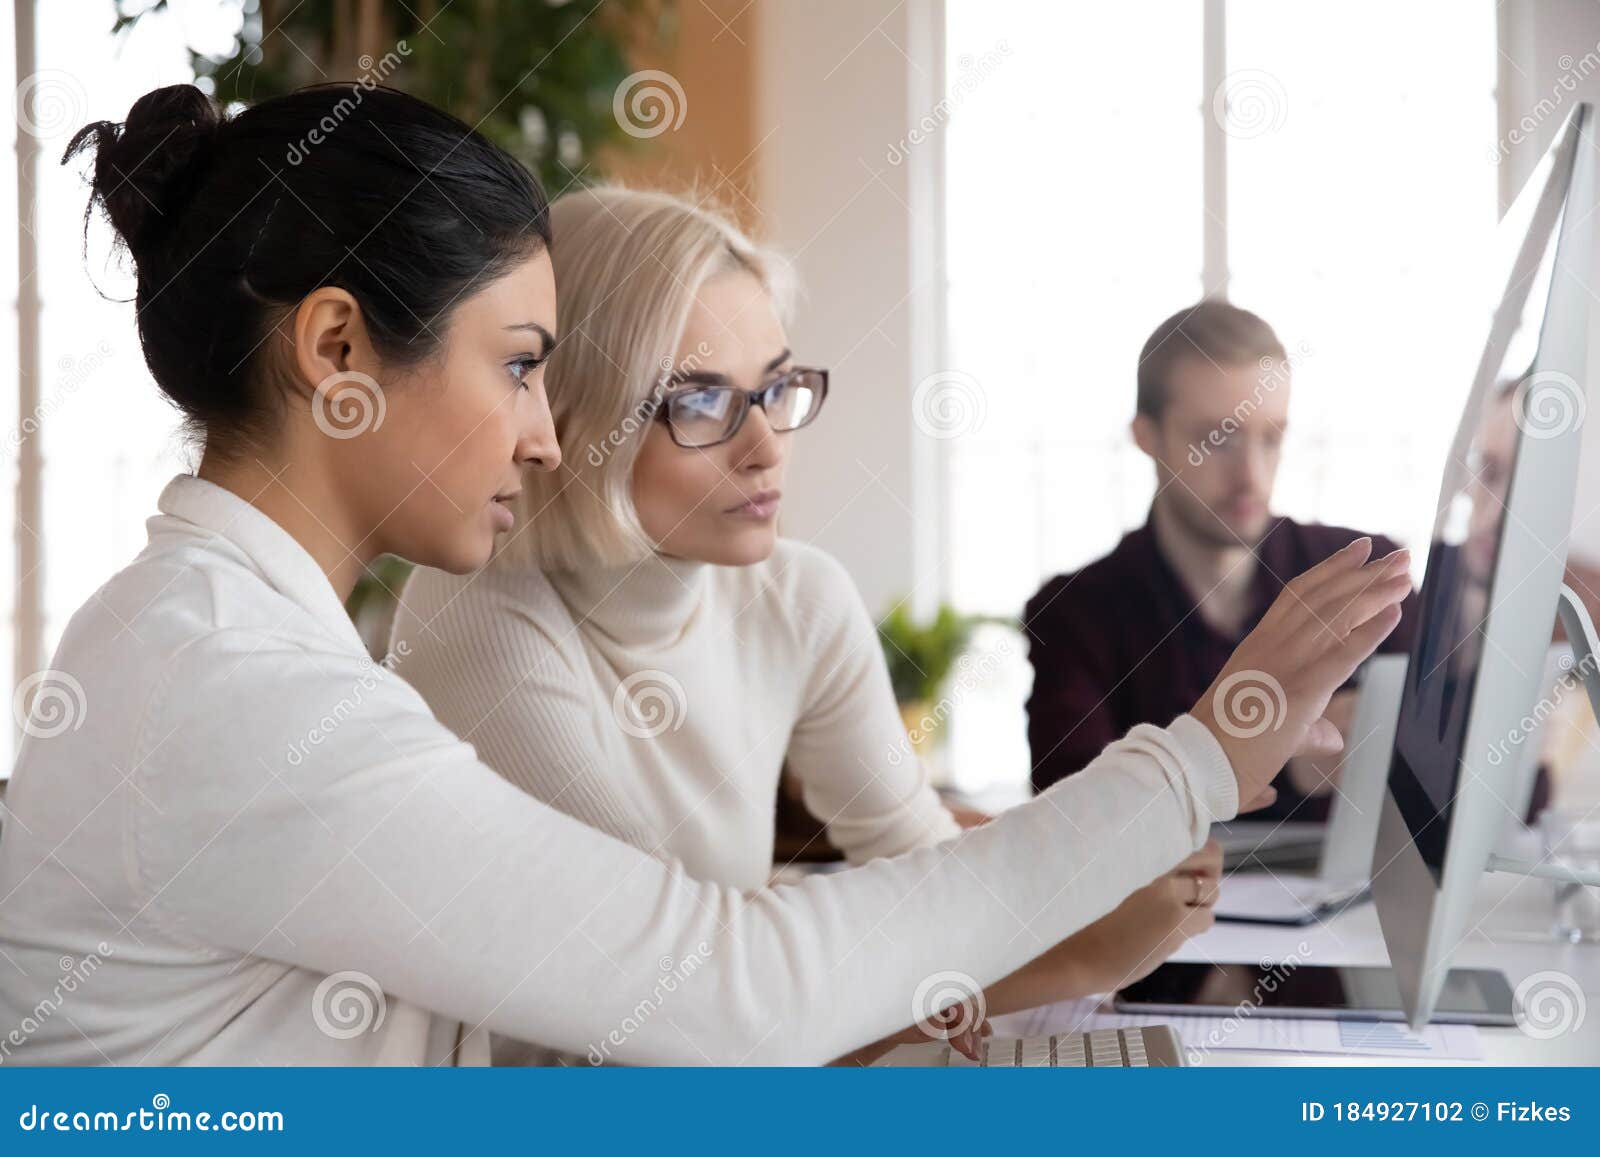 young indian businesswoman working with blonde female colleague on project.